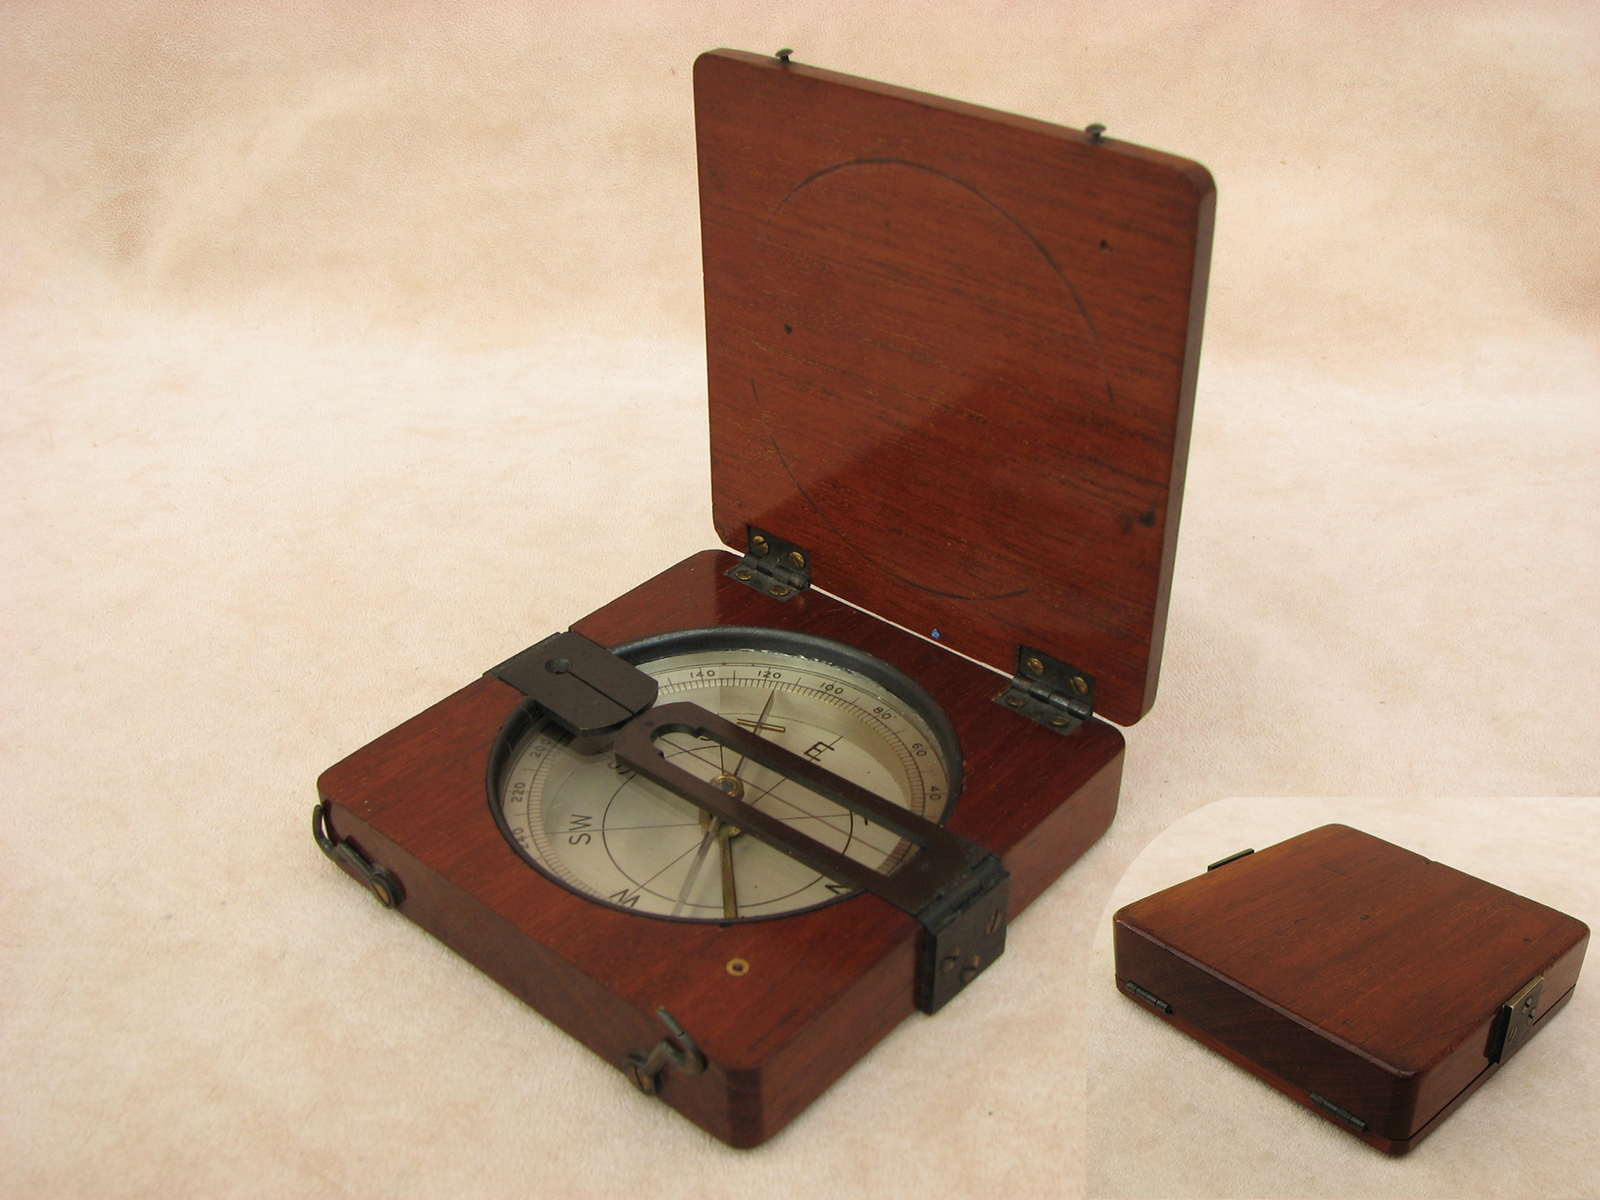 Antique mahogany cased needle pocket compass with twin sight vanes